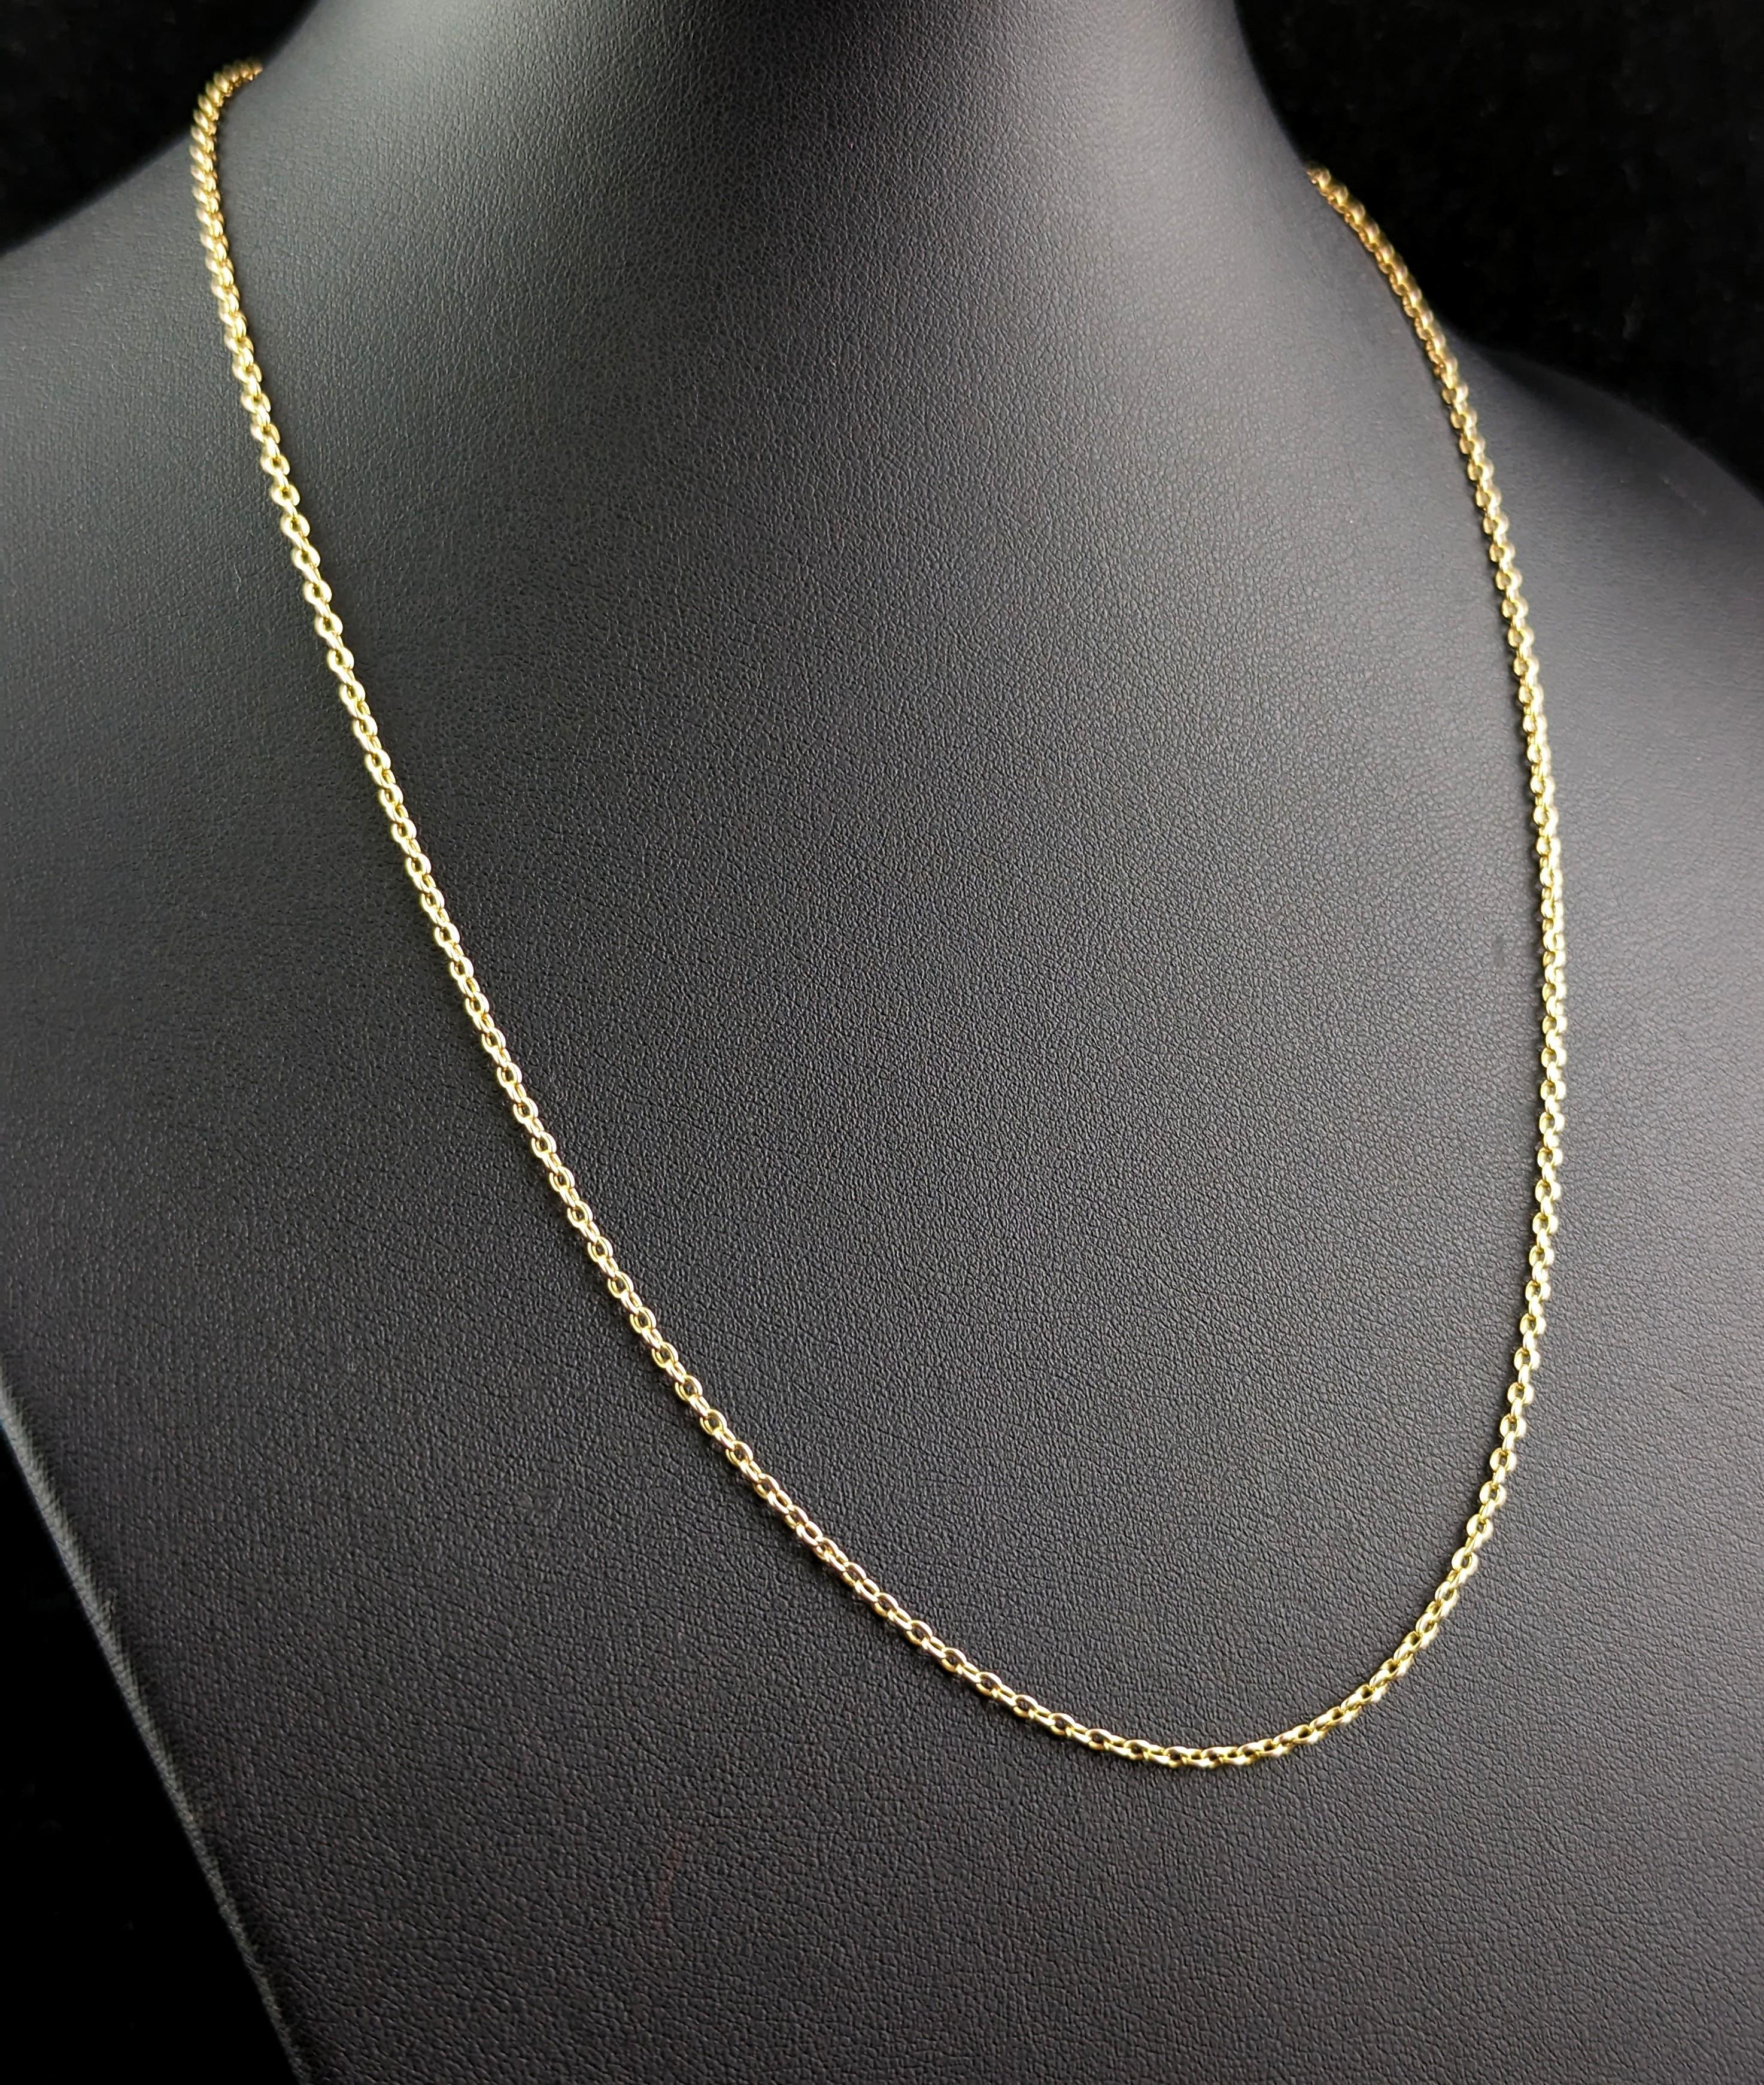 Women's Antique 15k Yellow Gold Chain Necklace, Rolo Link